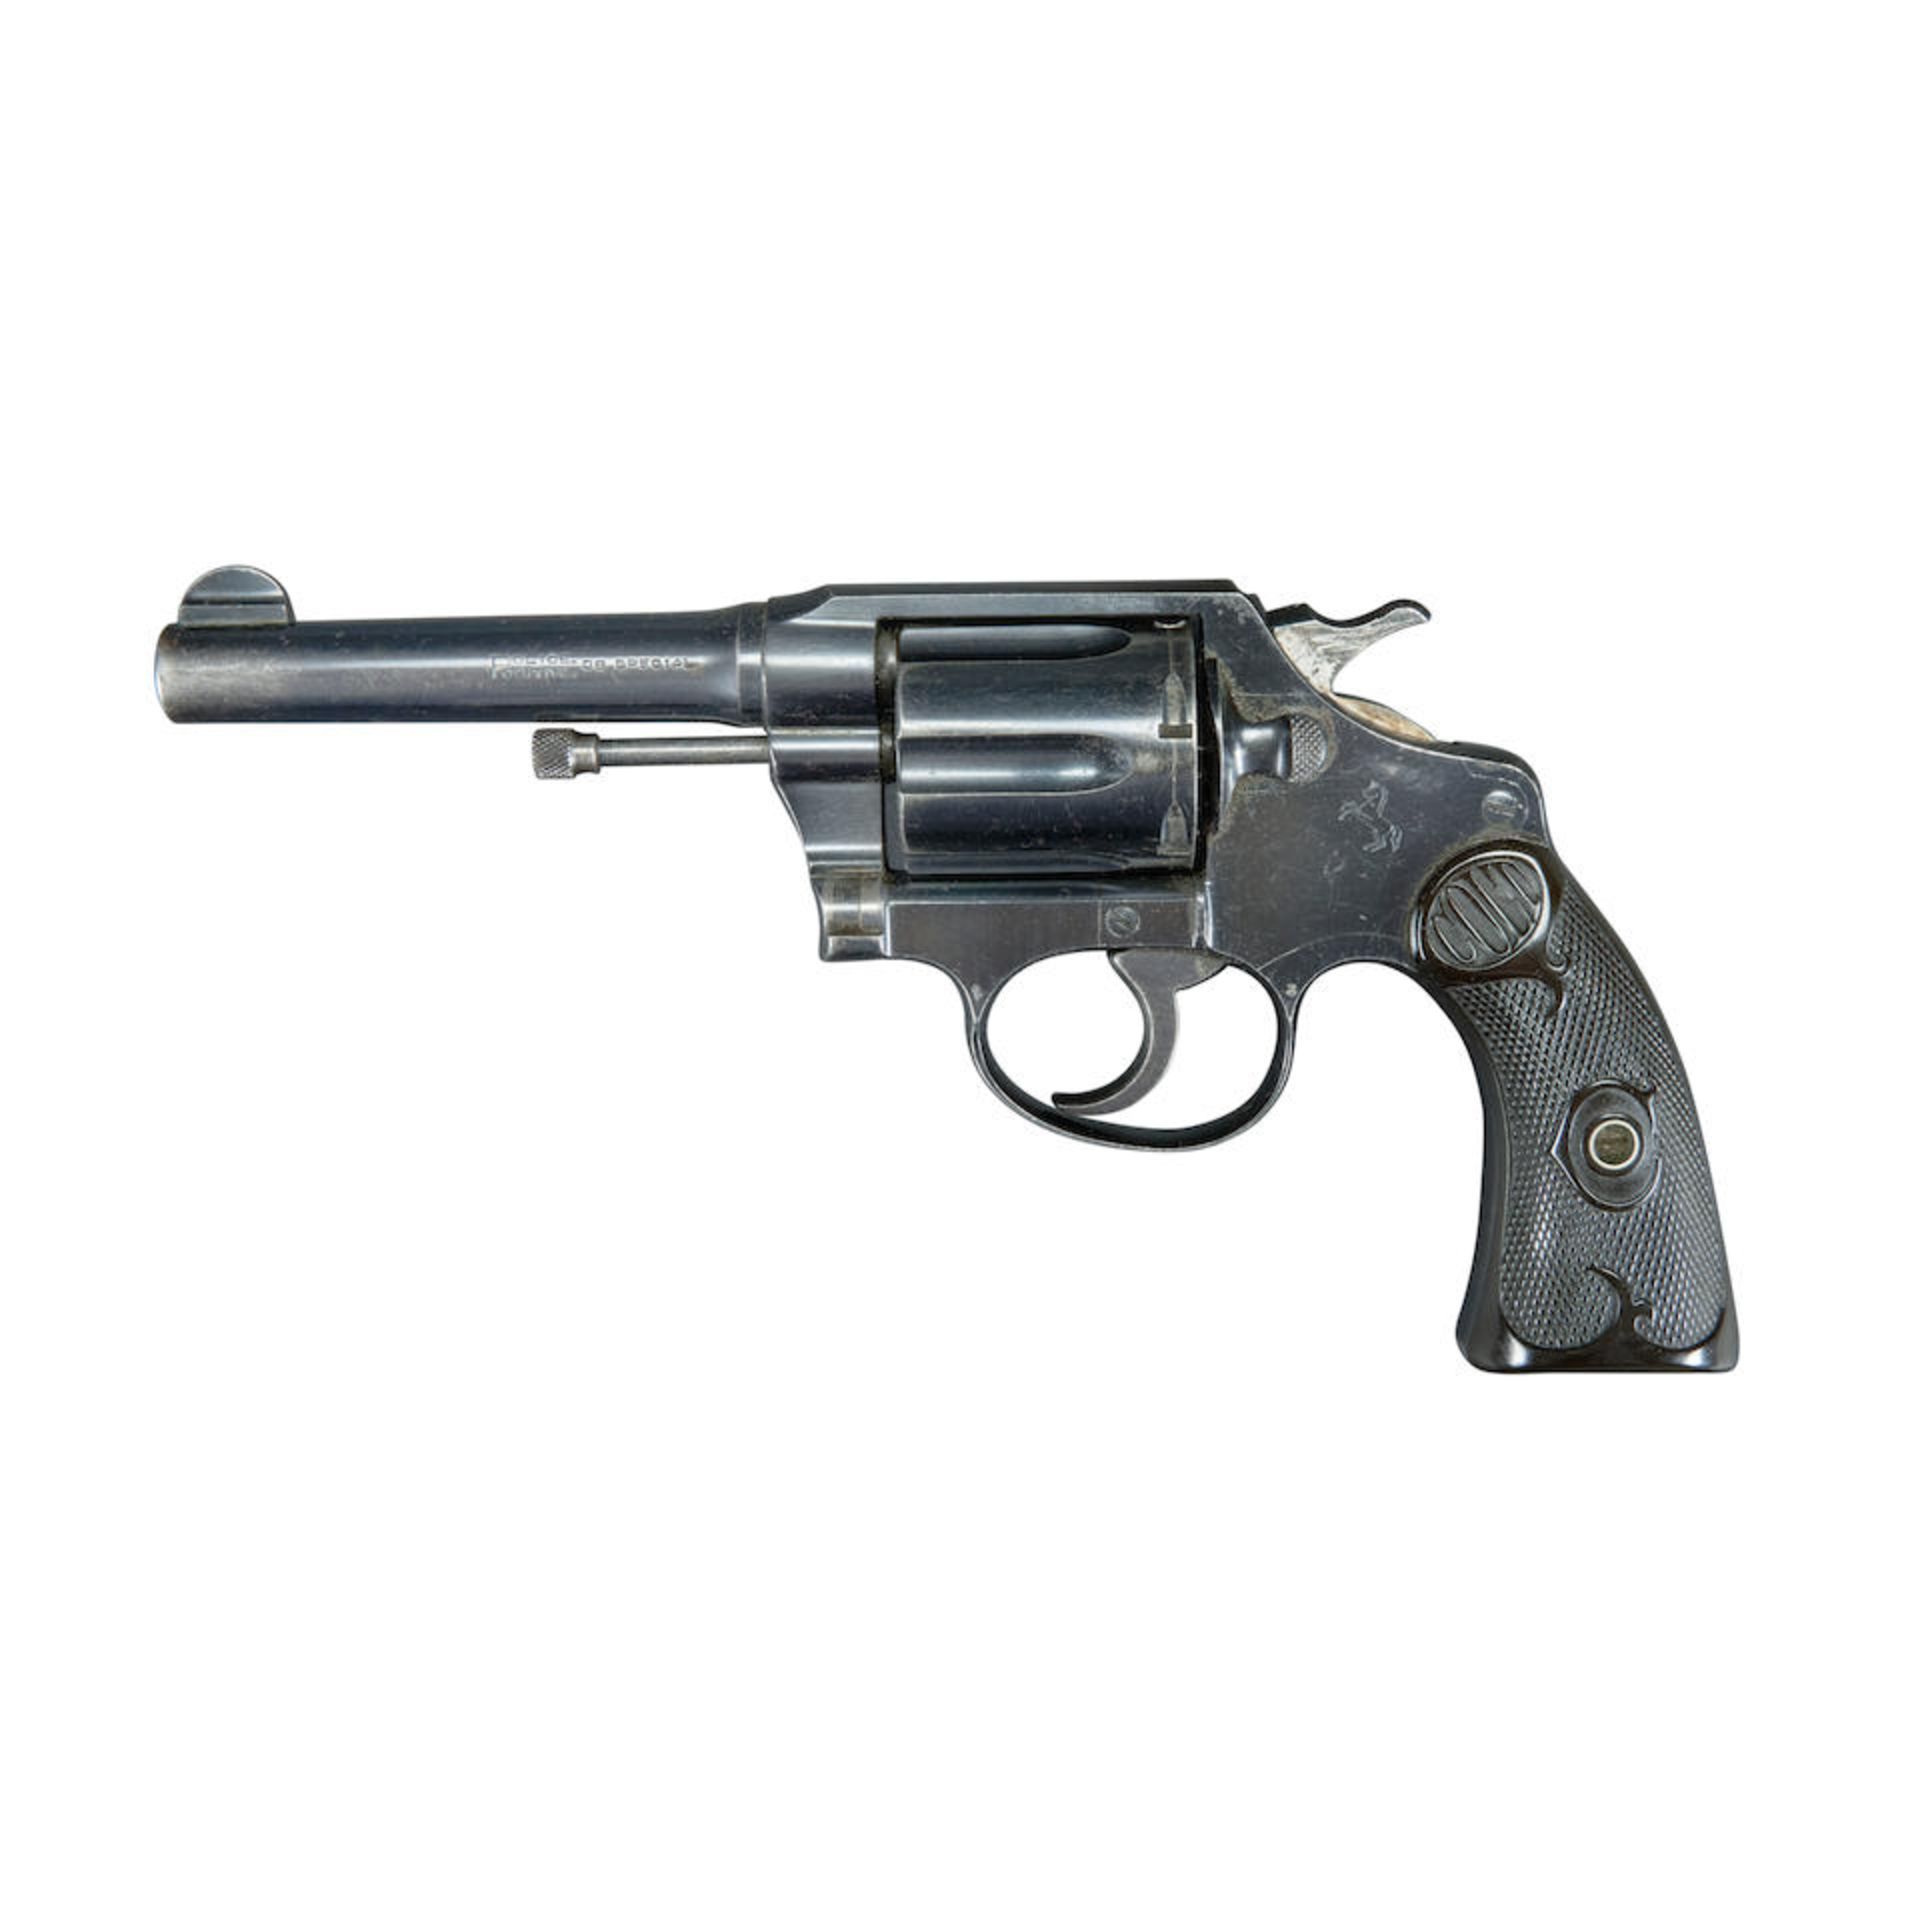 Colt Police Positive Special Double Action Revolver, Curio or Relic firearm - Image 2 of 2